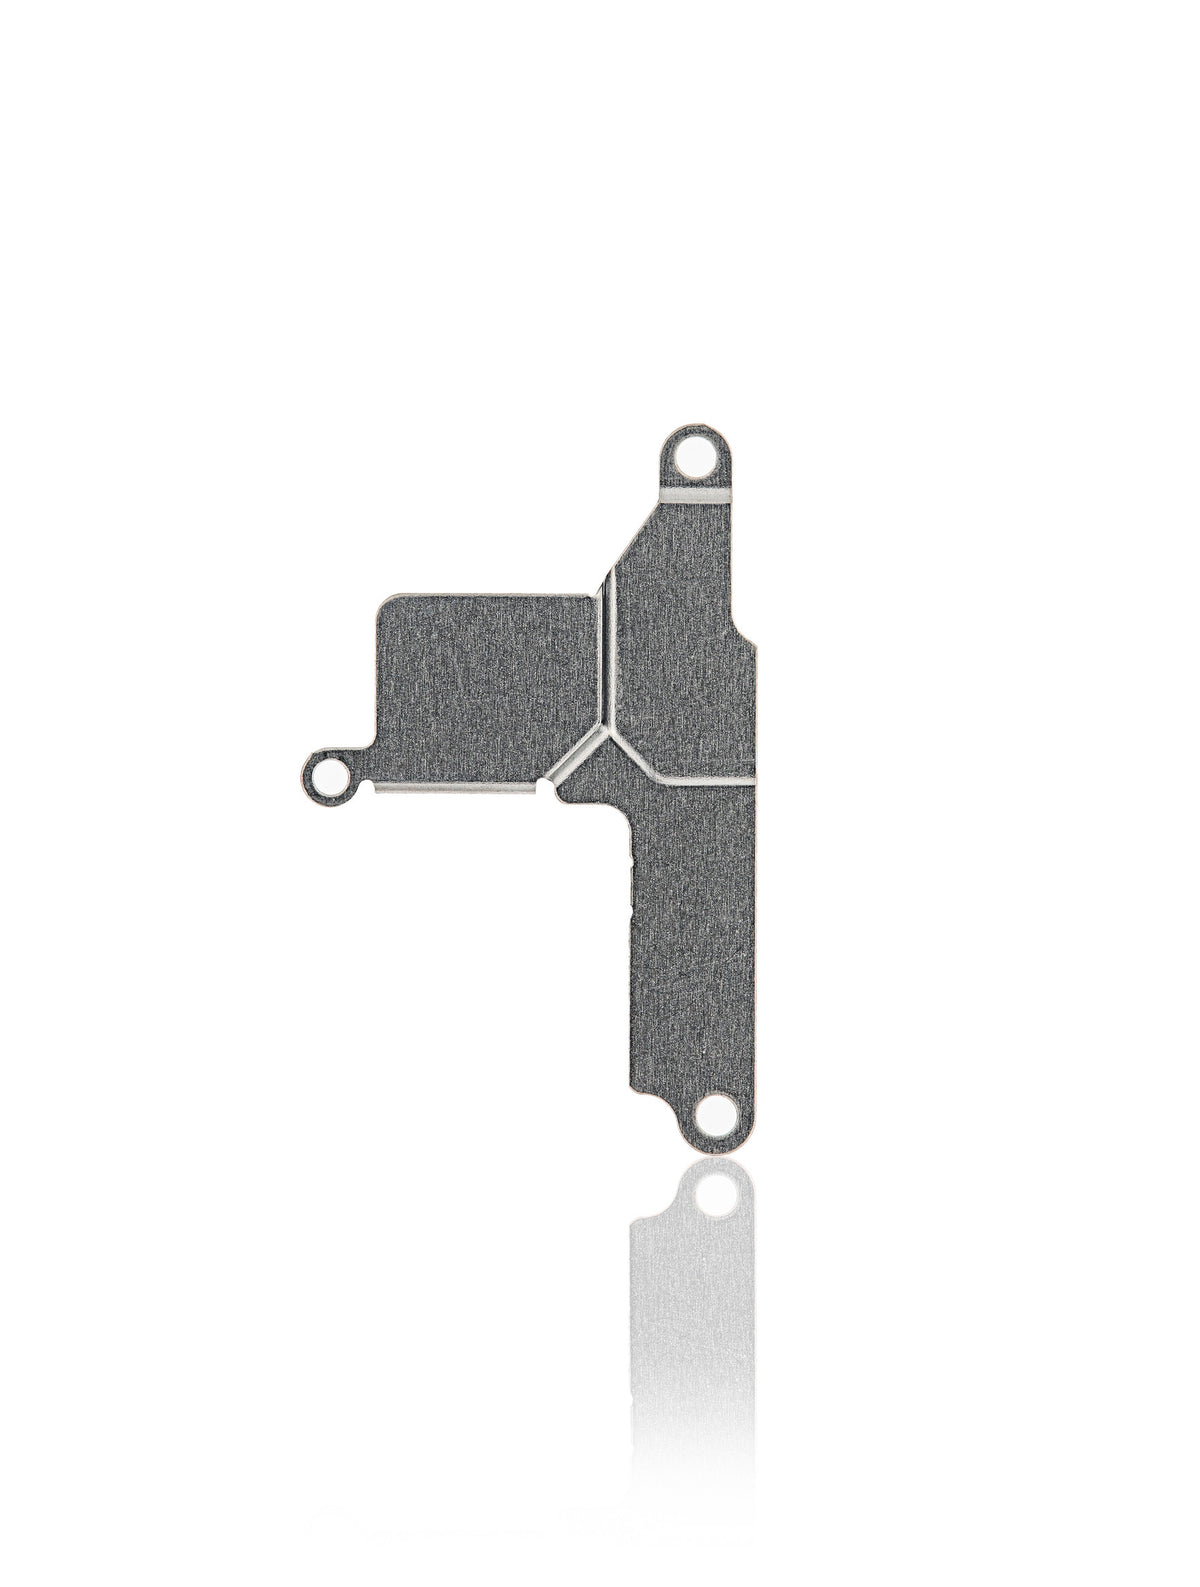 FRONT CAMERA FLEX CABLE HOLDING BRACKET (ON MOTHERBOARD) COMPATIBLE WITH IPHONE 8